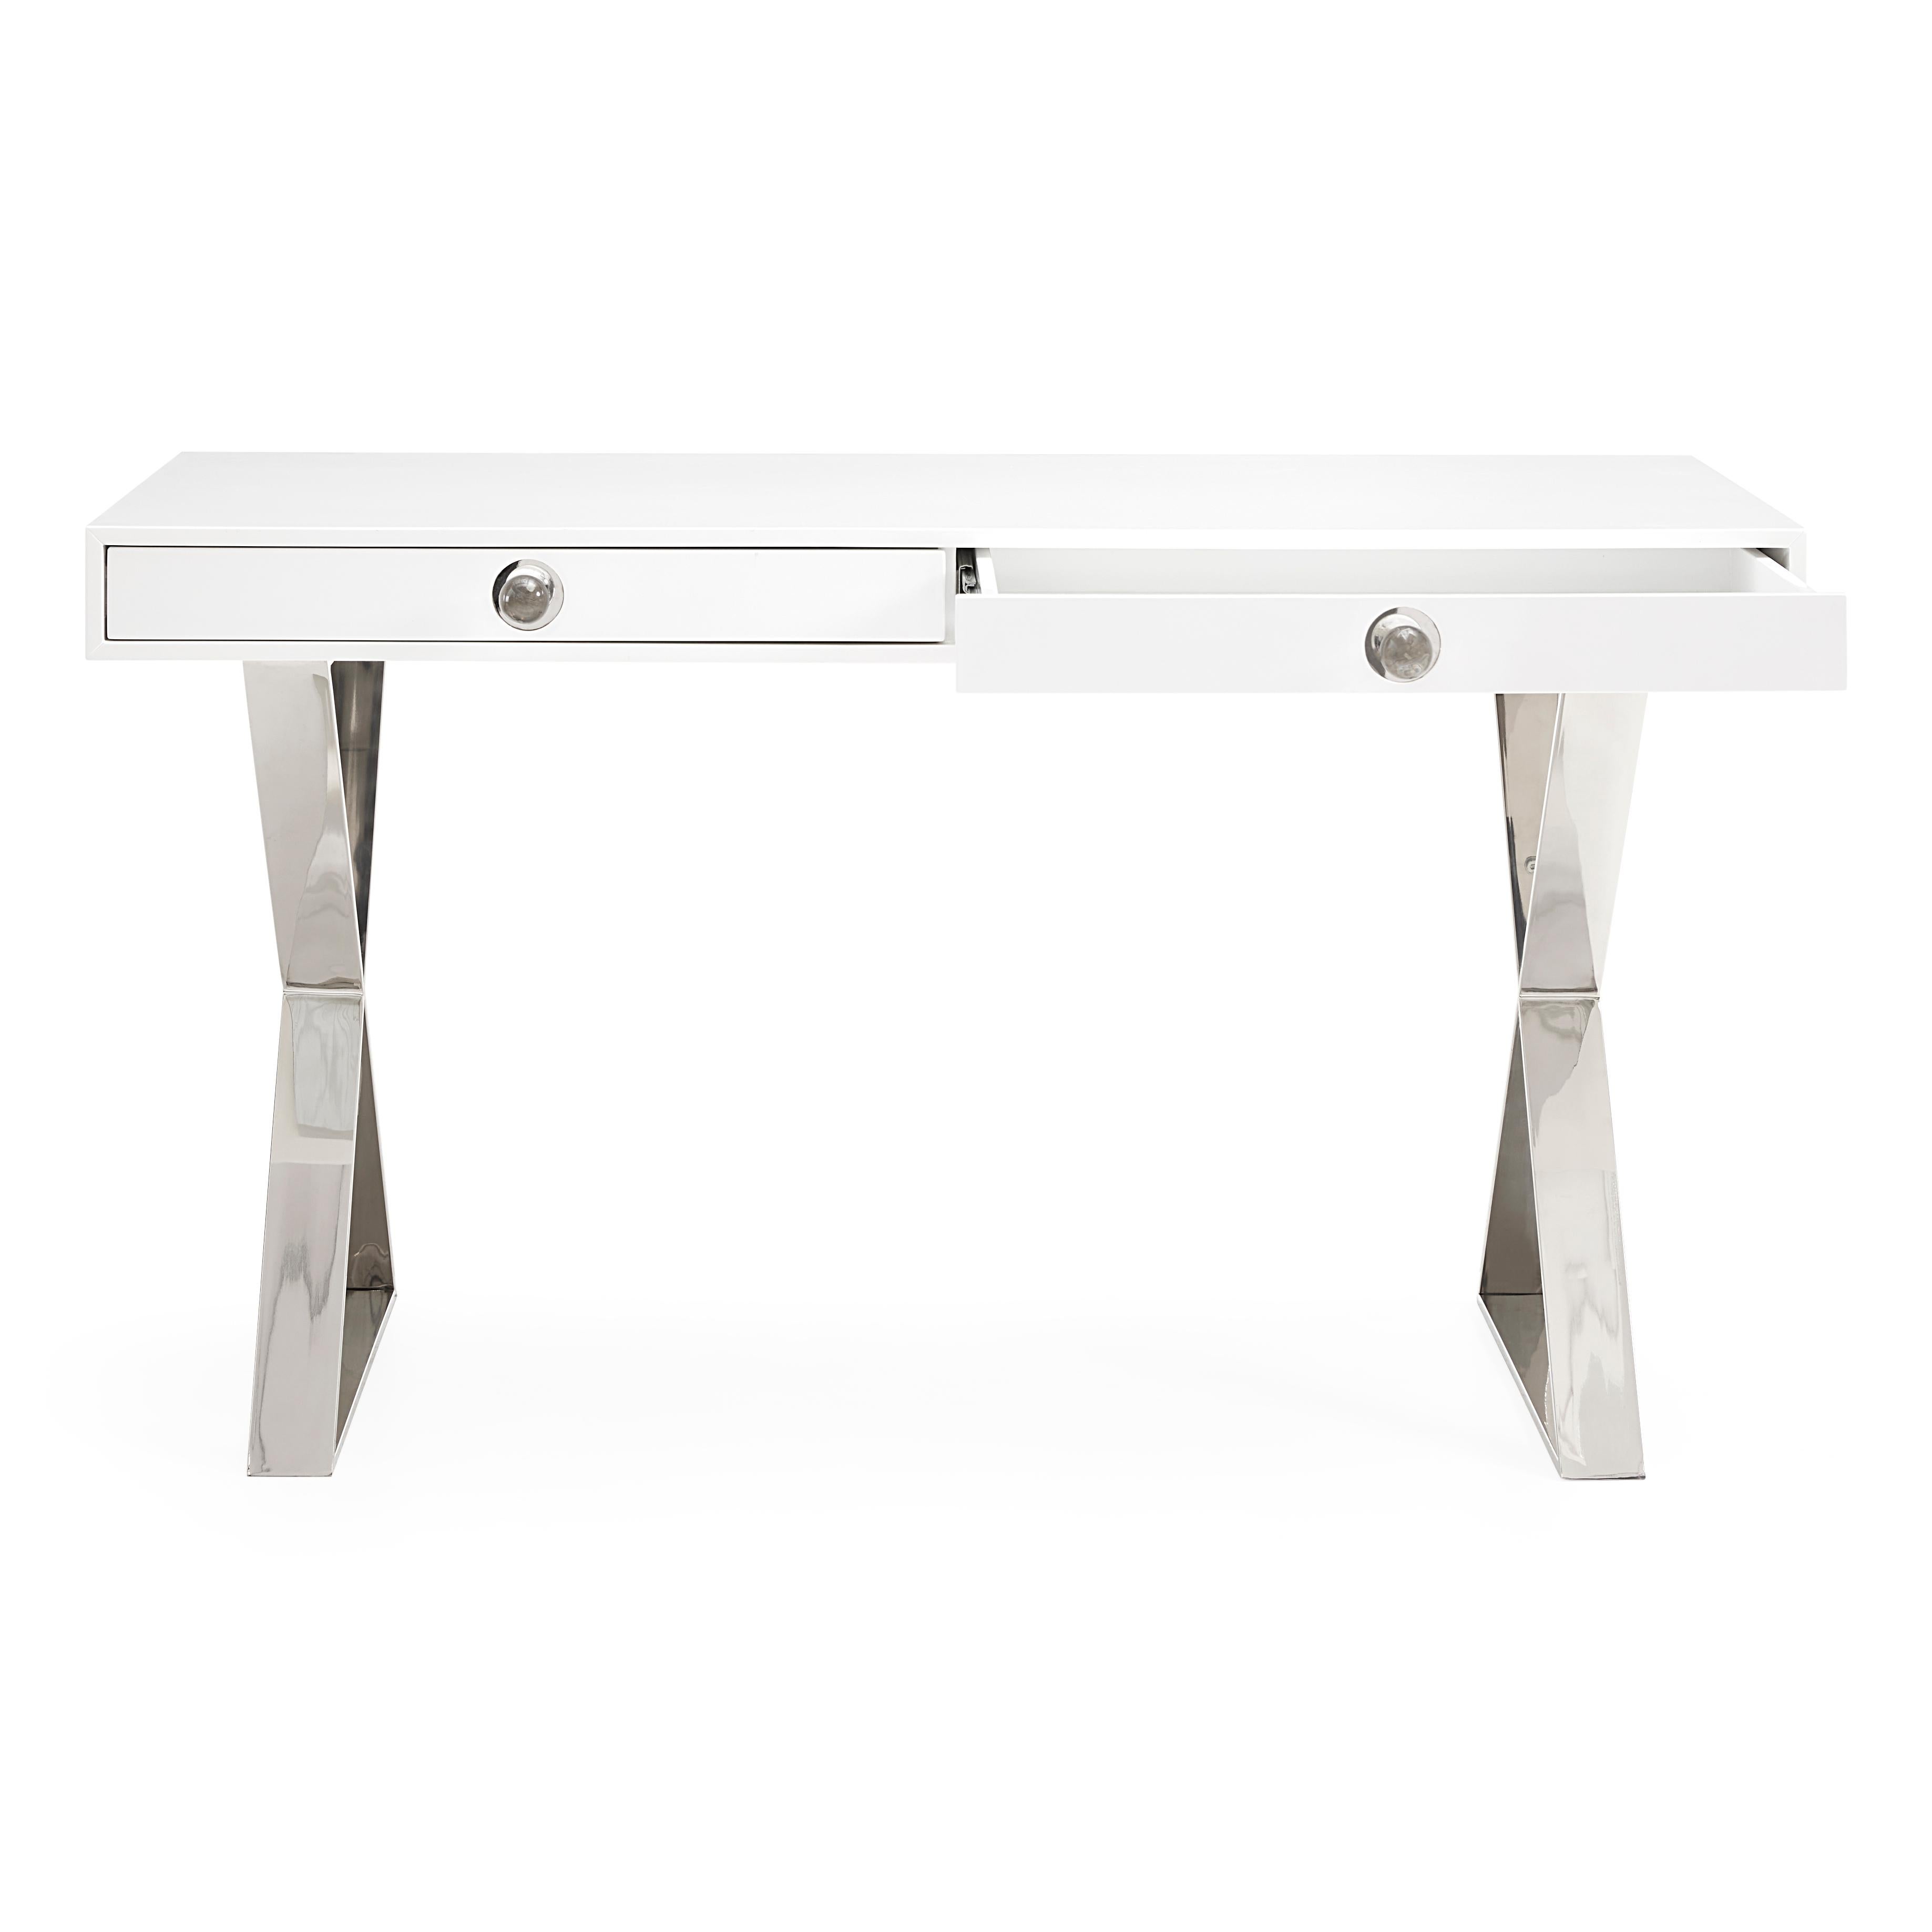 Campaign Channing Desk in White Lacquer and Nickel